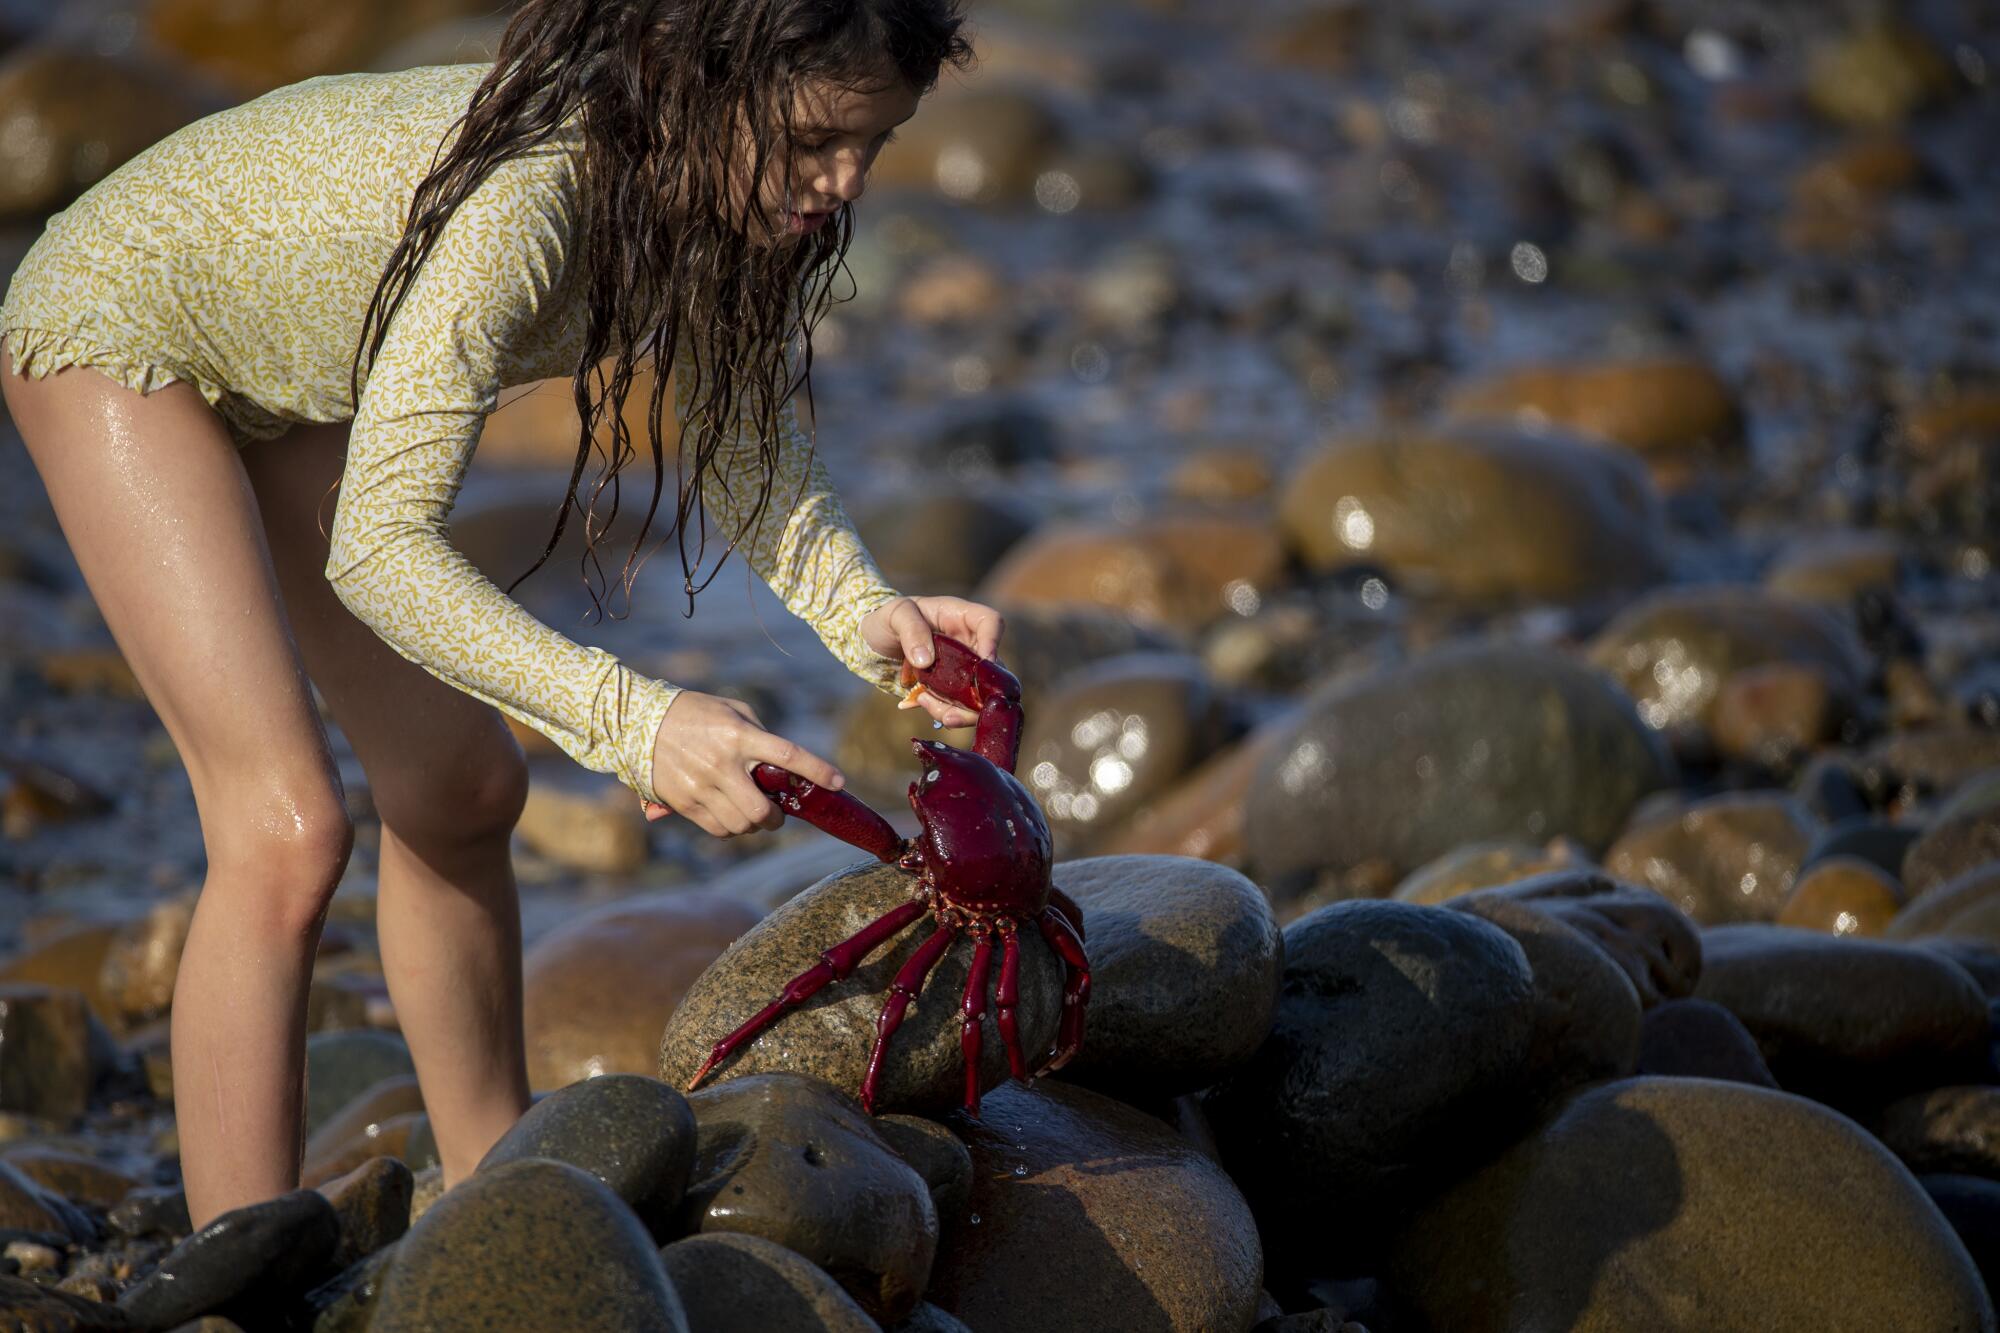 A young surf fan inspects a crab that washed up on the cobble-stones at sunrise.